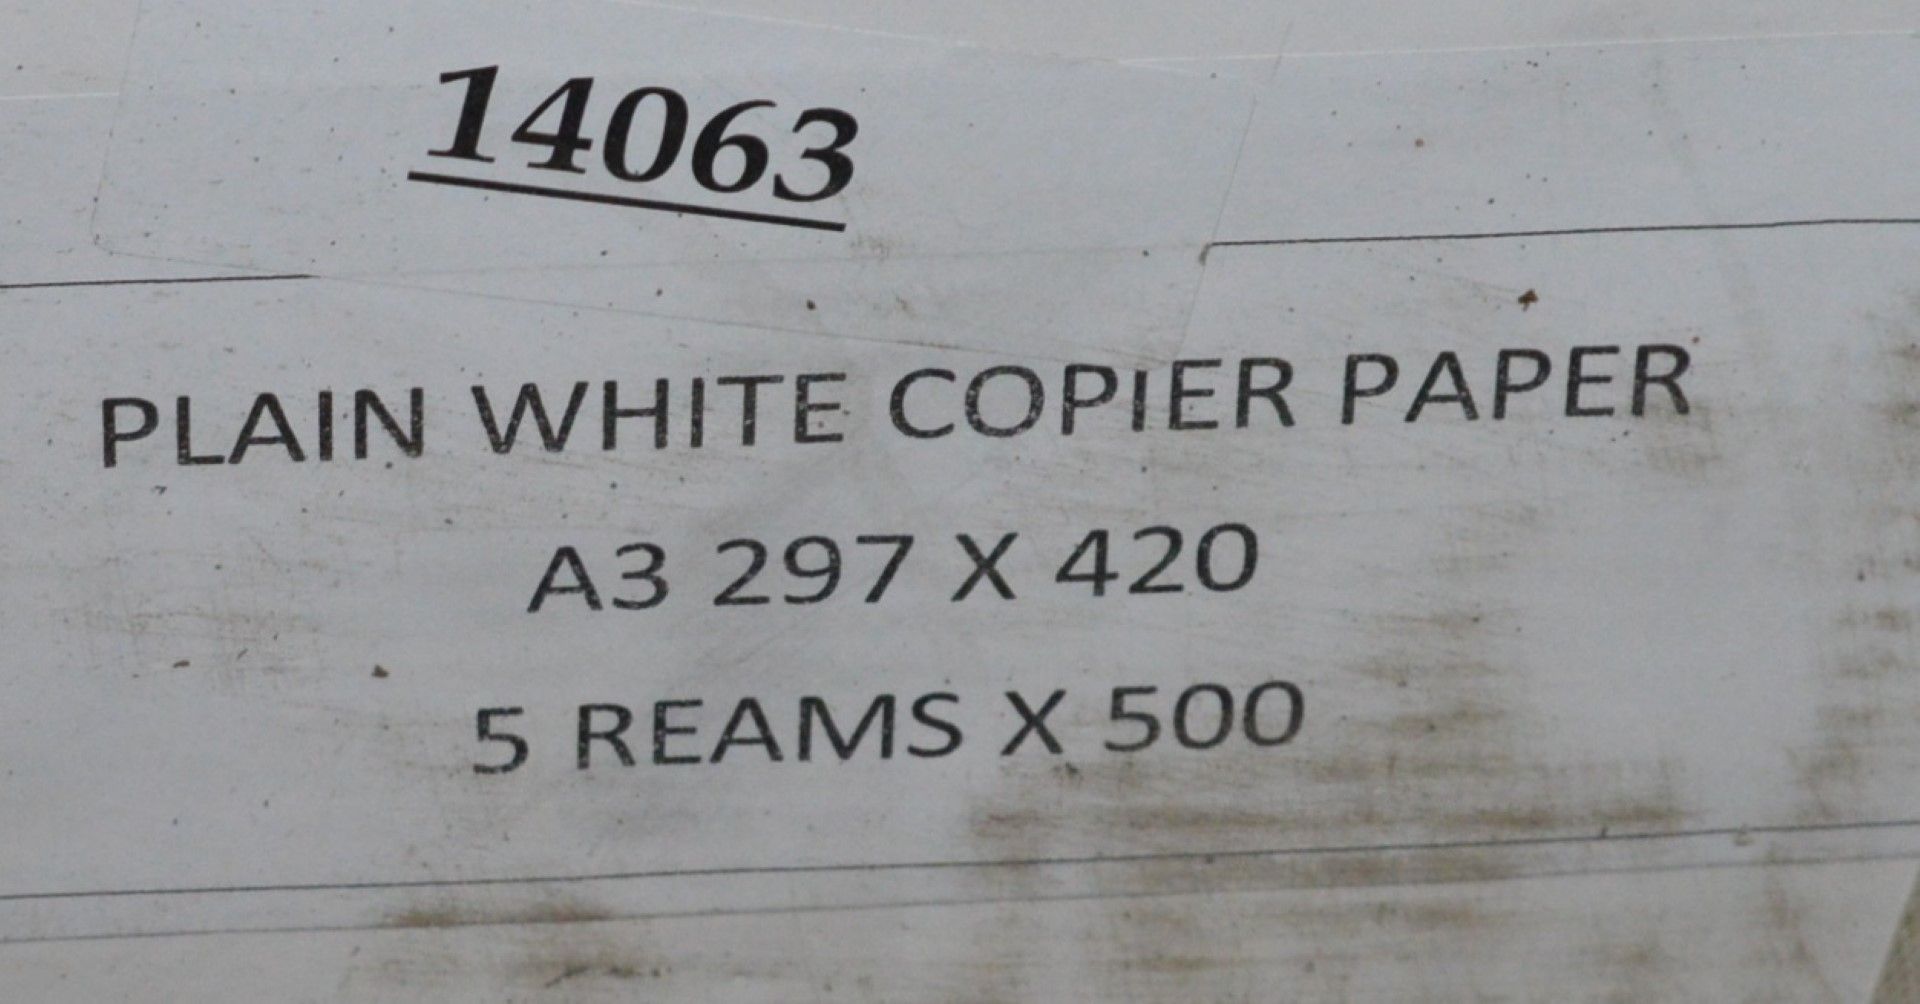 5 x Reams of A3 297x420mm Plain White Copier Paper - Includes Full Case of 5 Reams Including 500 - Image 2 of 3